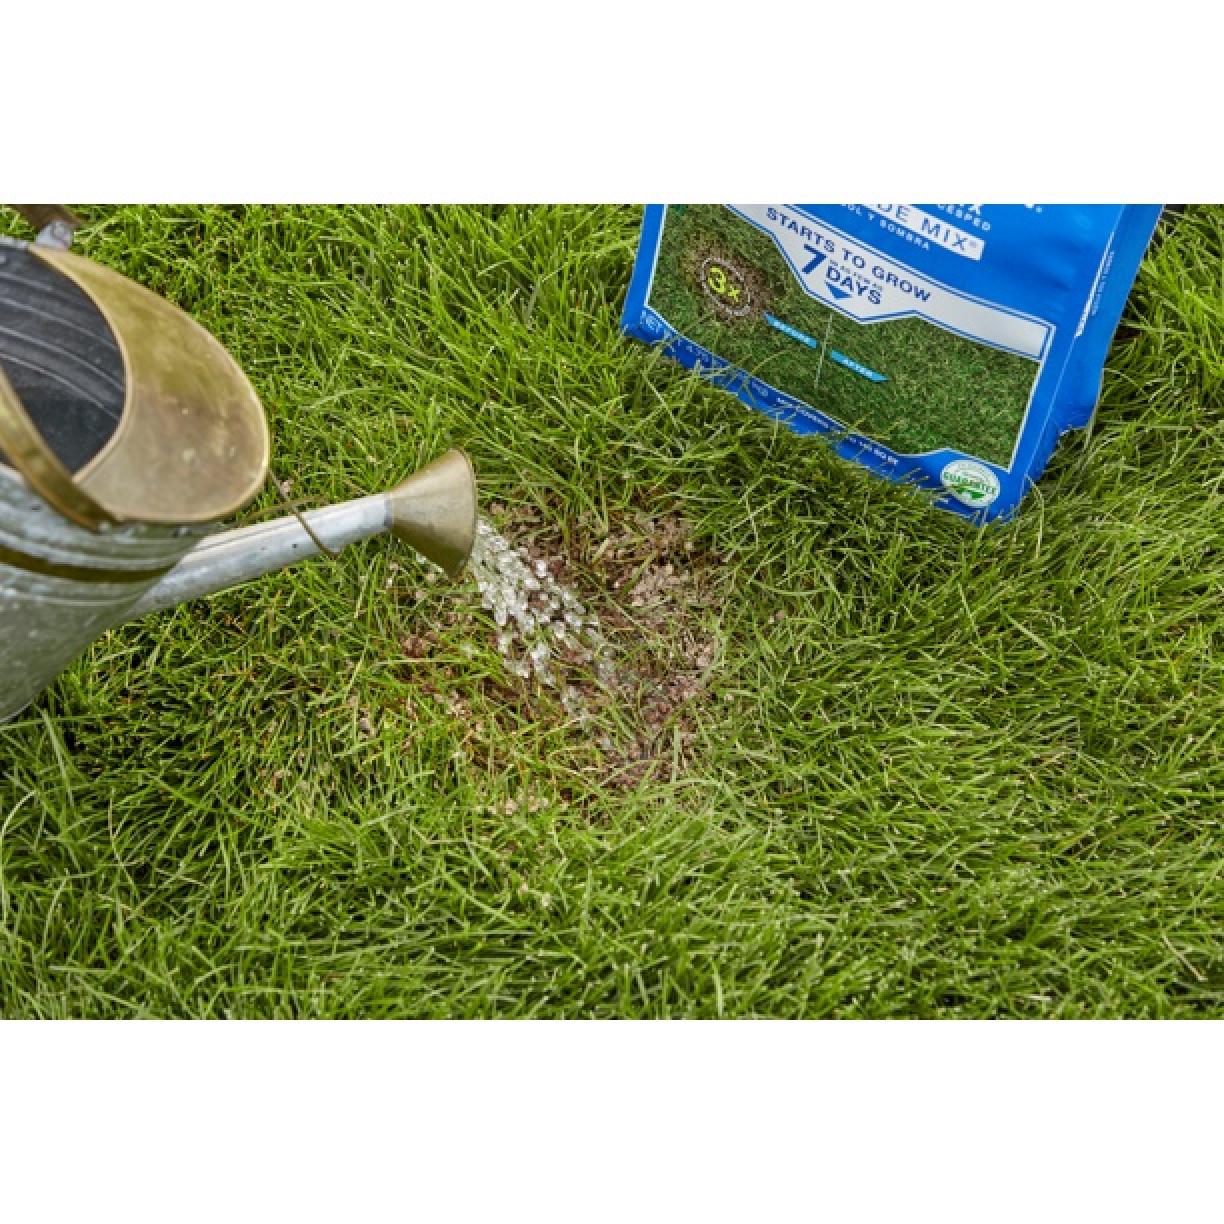 Scotts PatchMaster Lawn Repair Mix